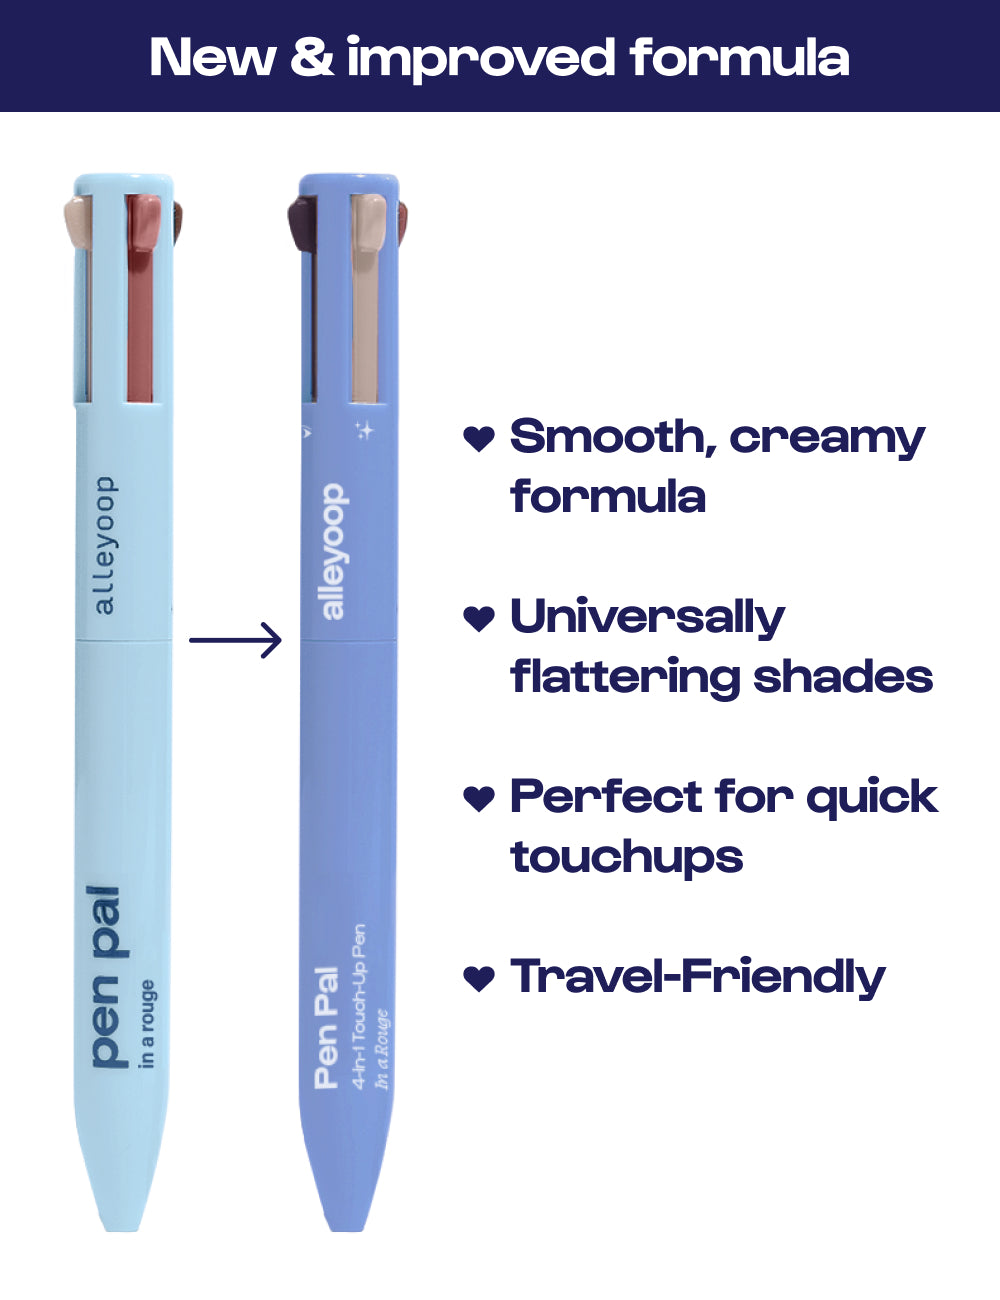 Touch Up Pen